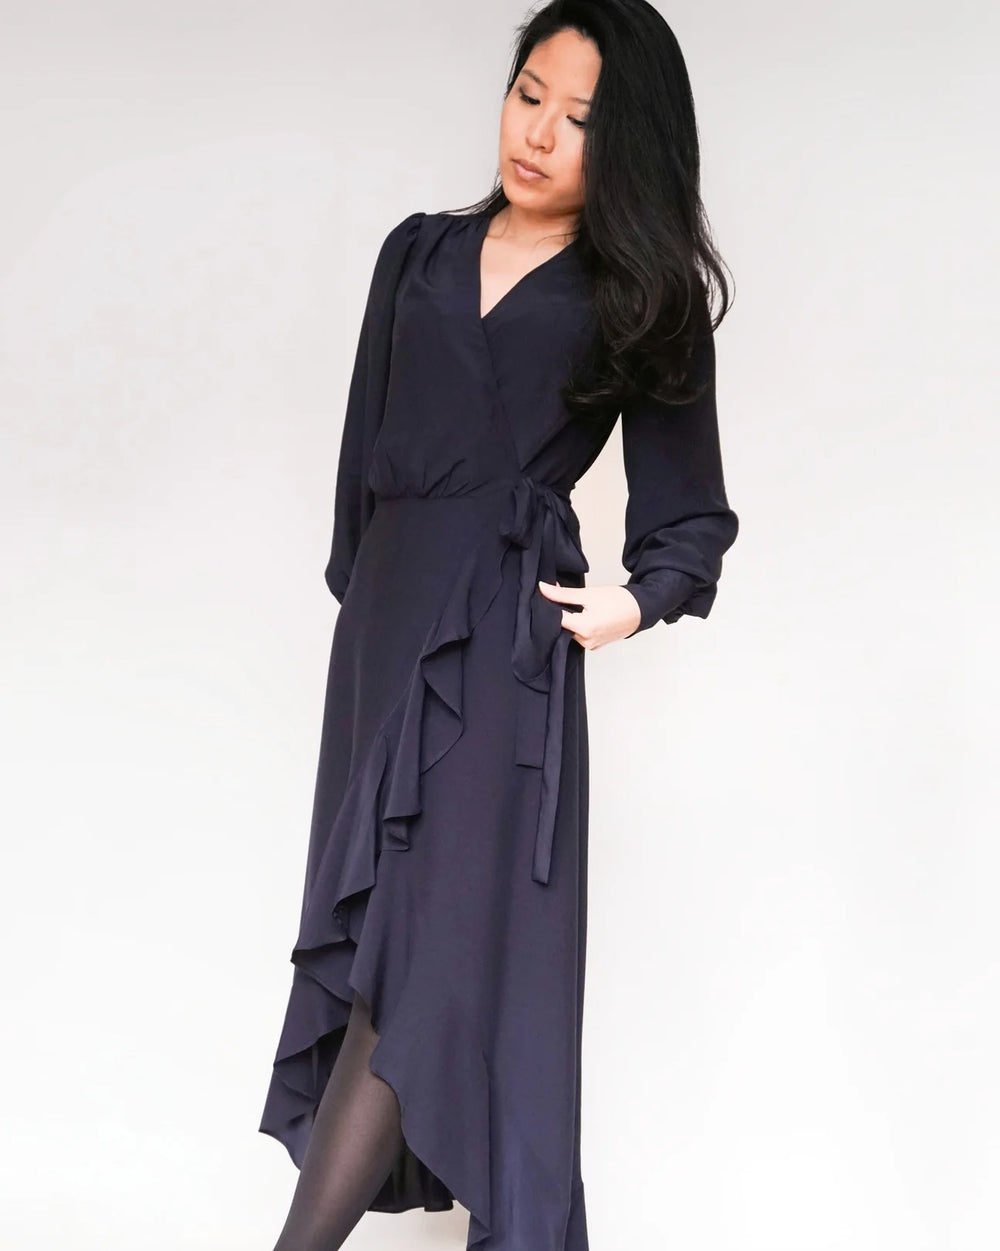 Woman wearing the Joline Dress sewing pattern from Bara Studio on The Fold Line. A wrap dress pattern made in viscose, cotton, linen, or lyocell fabrics, featuring a deep V-neck, tiered high-low hem, full length sleeve, gathered cuff with button closure, 